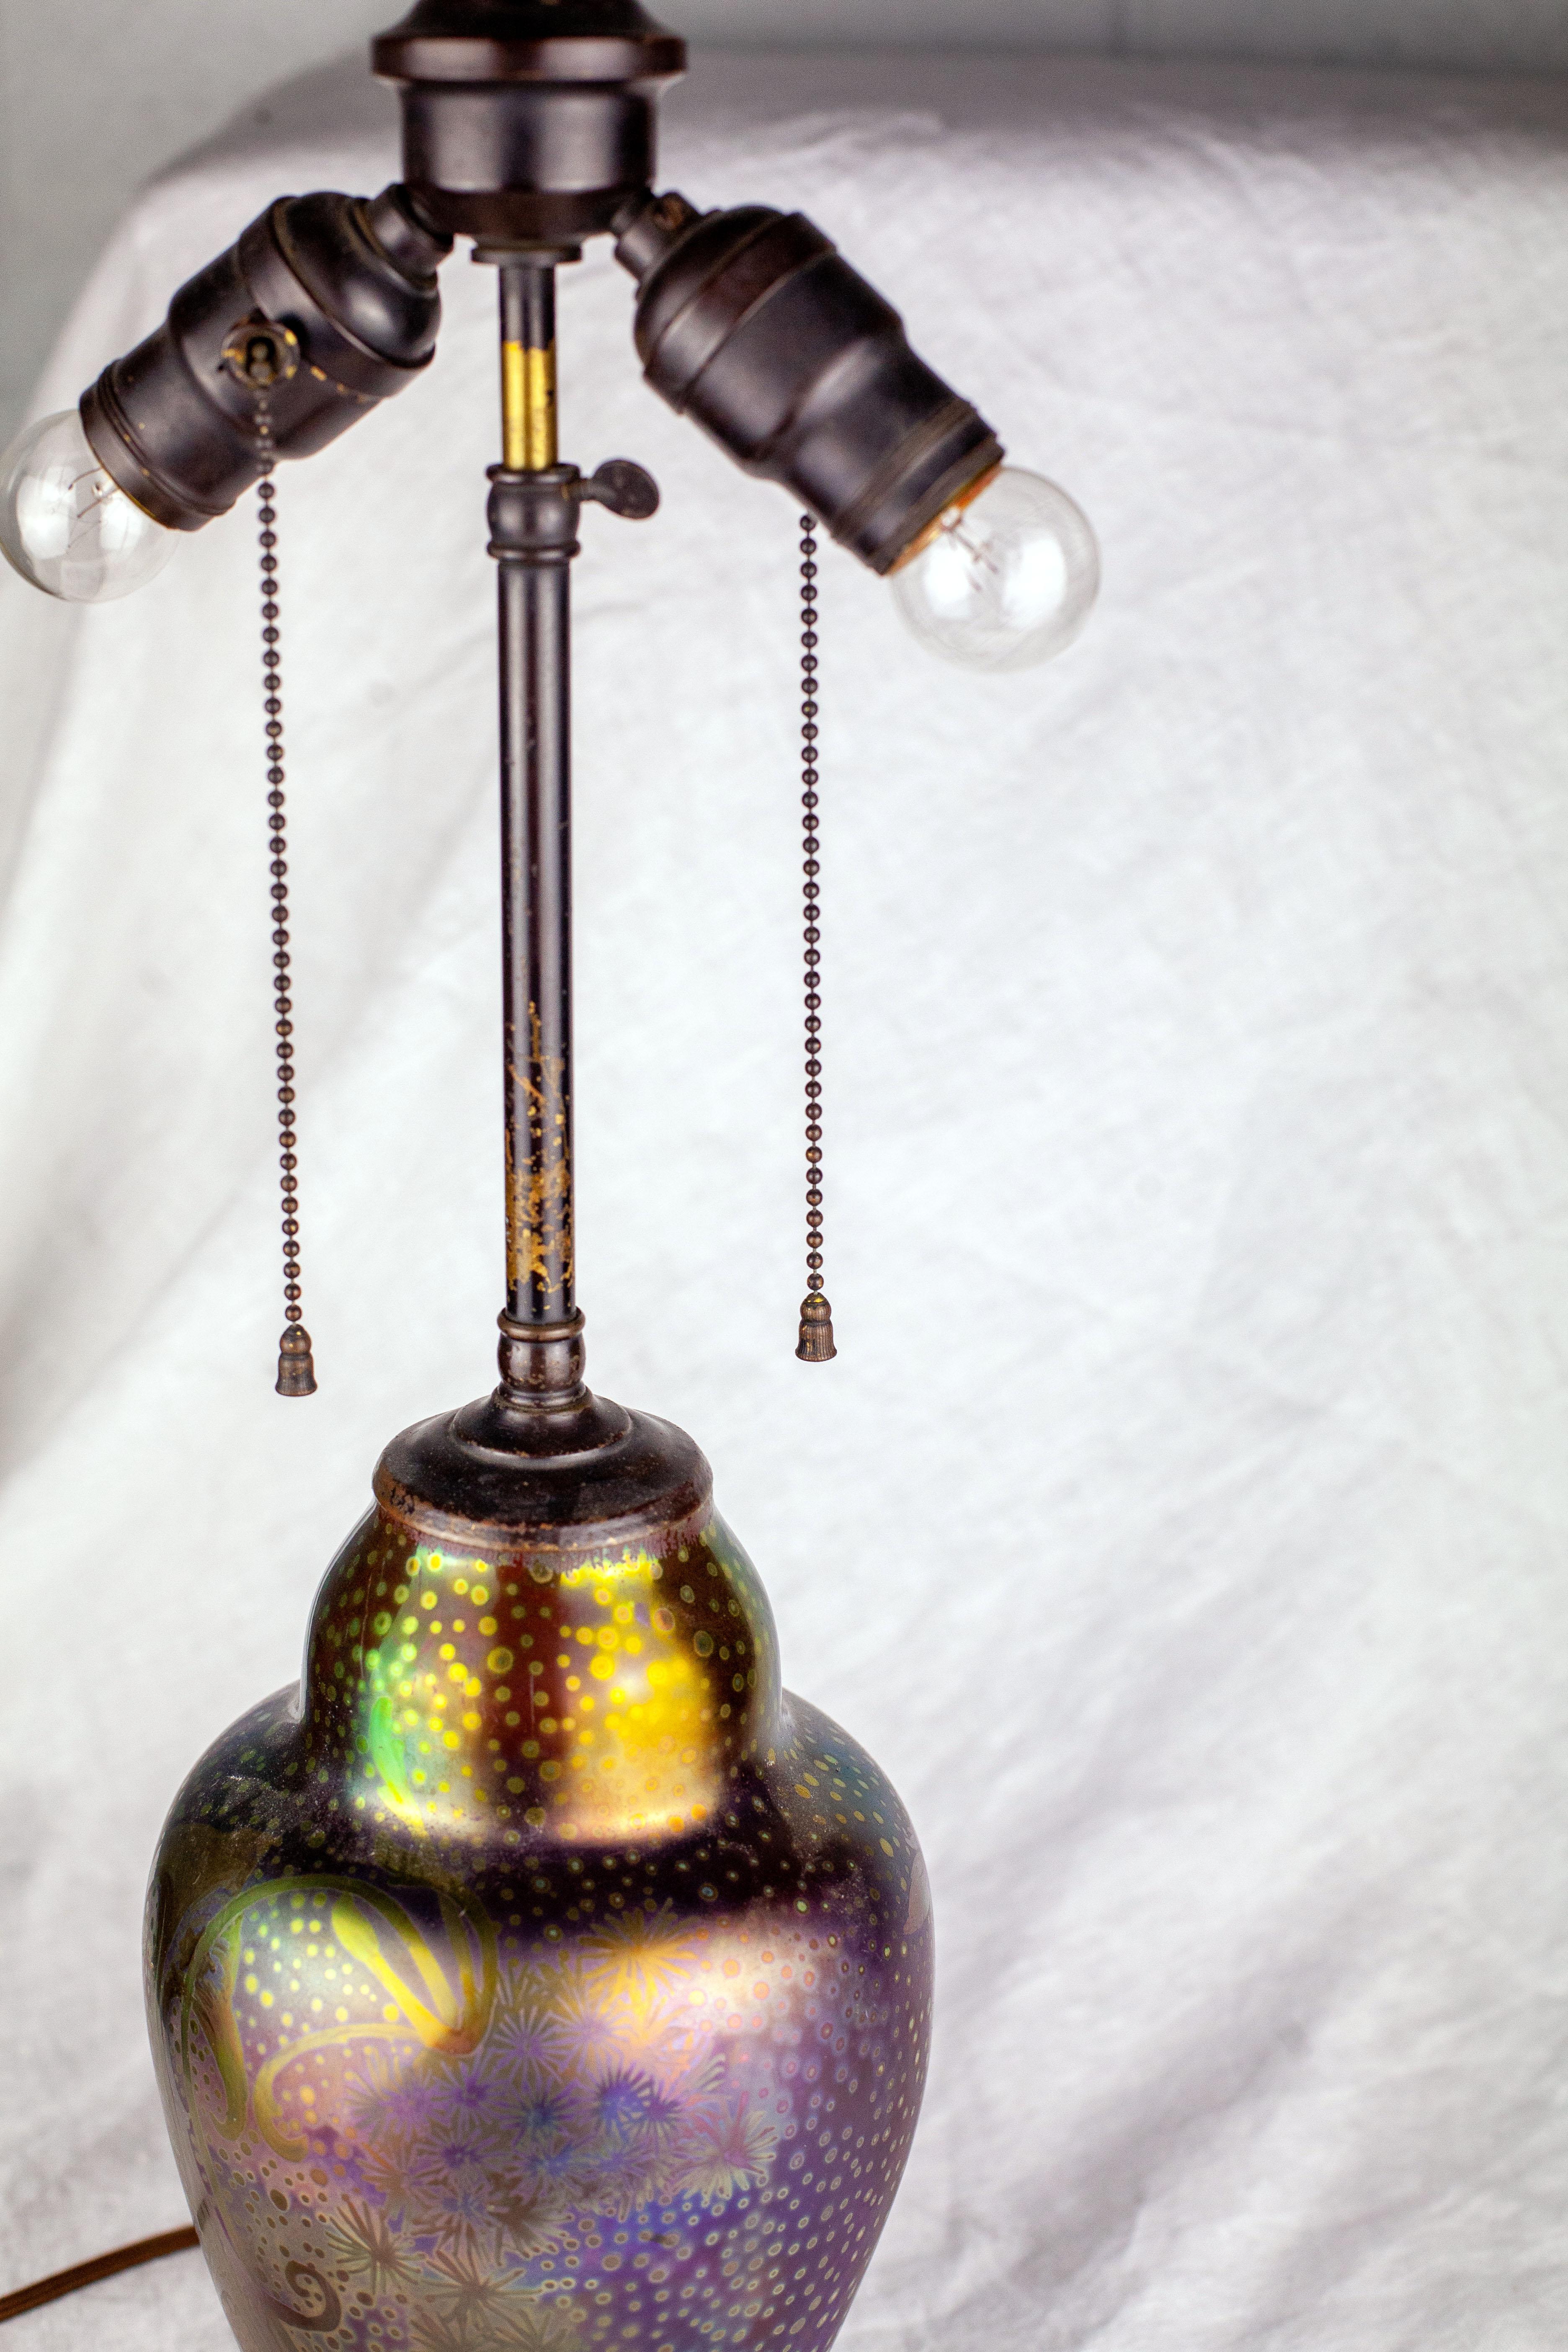 Art Nouveau Iridescent Earthenware Weller Sicard Lamp Base In Good Condition For Sale In Bloomfield Hills, MI